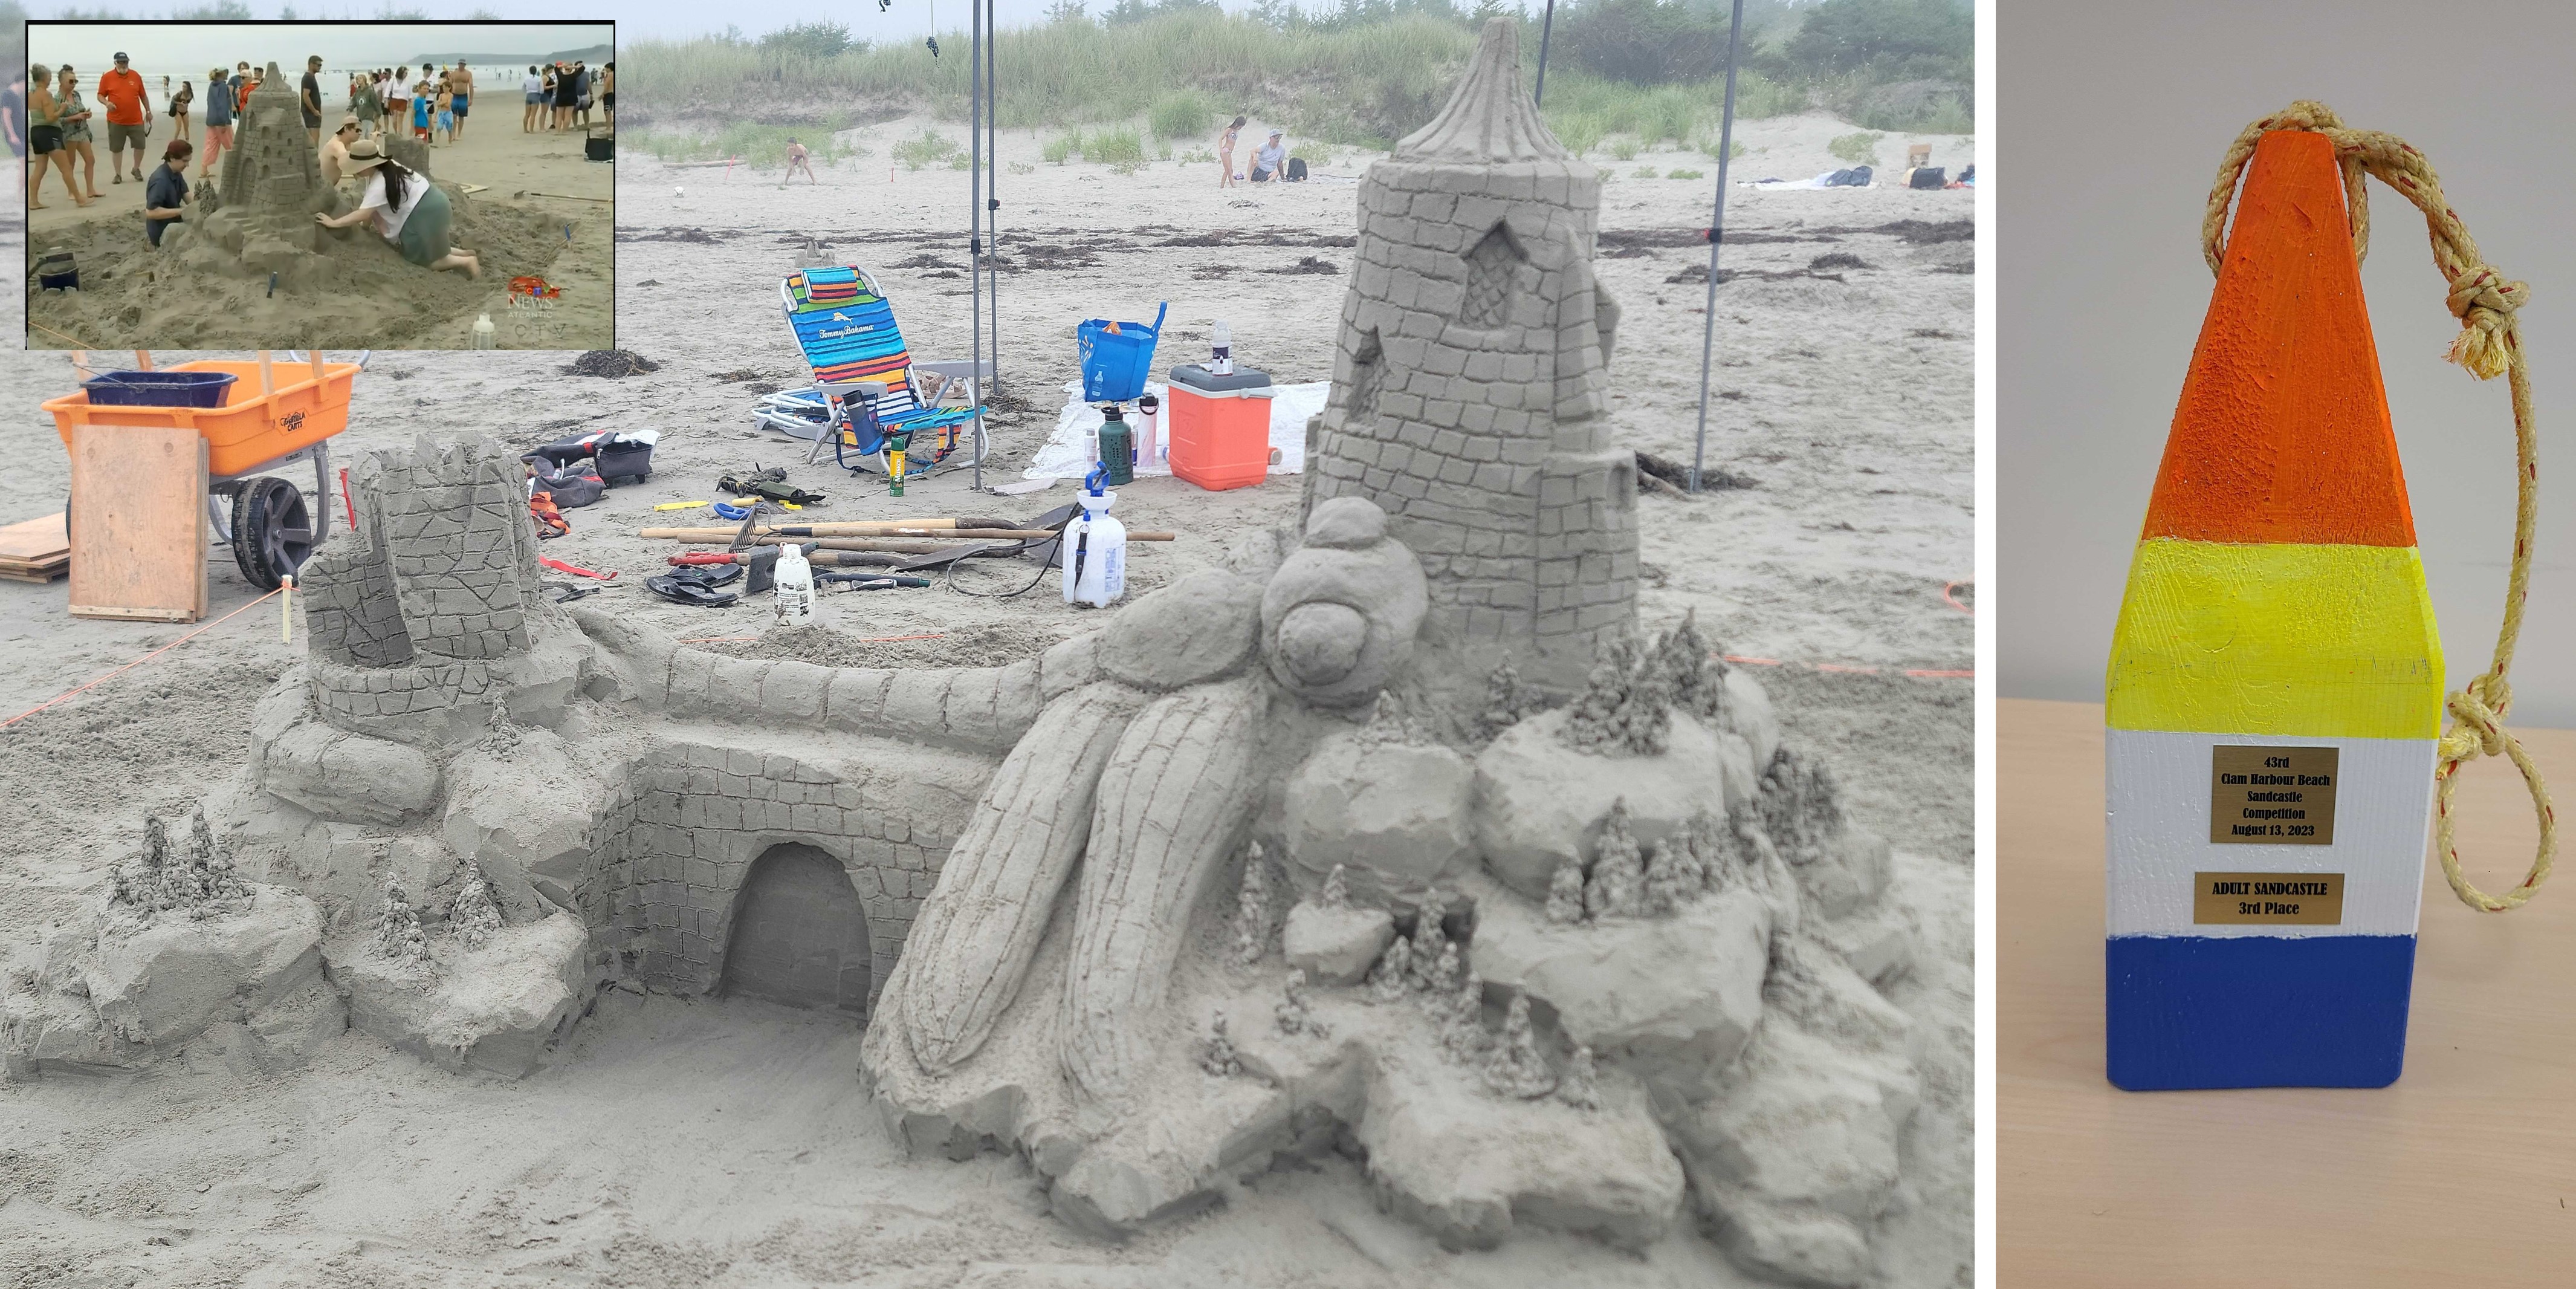 Sand sculpture of a dragonfly attacking a castle, with the third-place buoy trophy next to it.